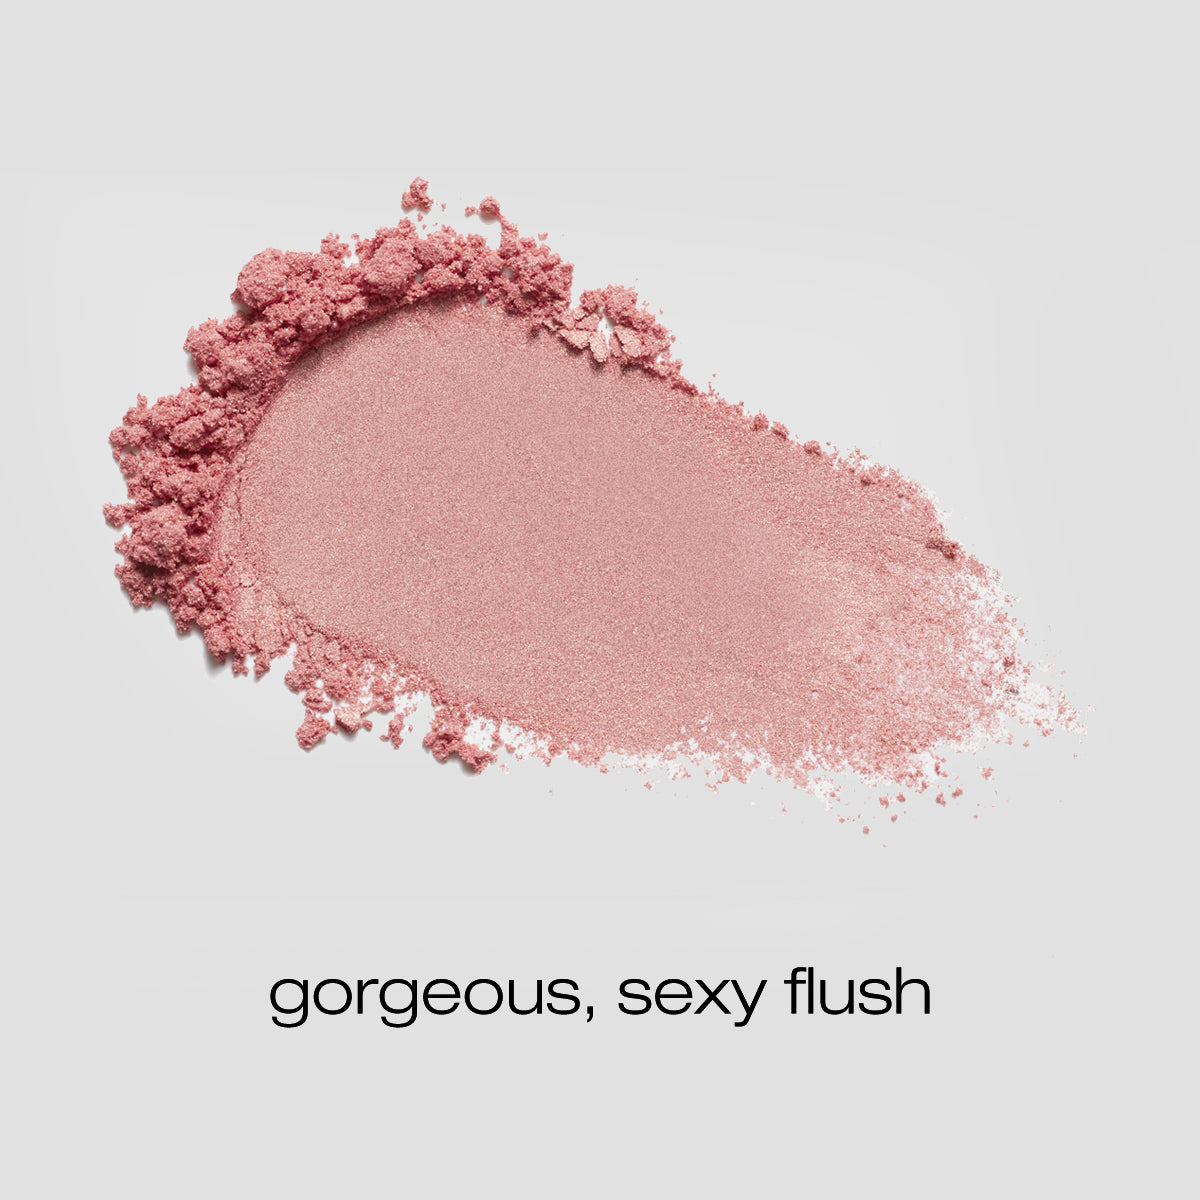 Spread of the Bellini blush and described as gorgeous, sexy flush